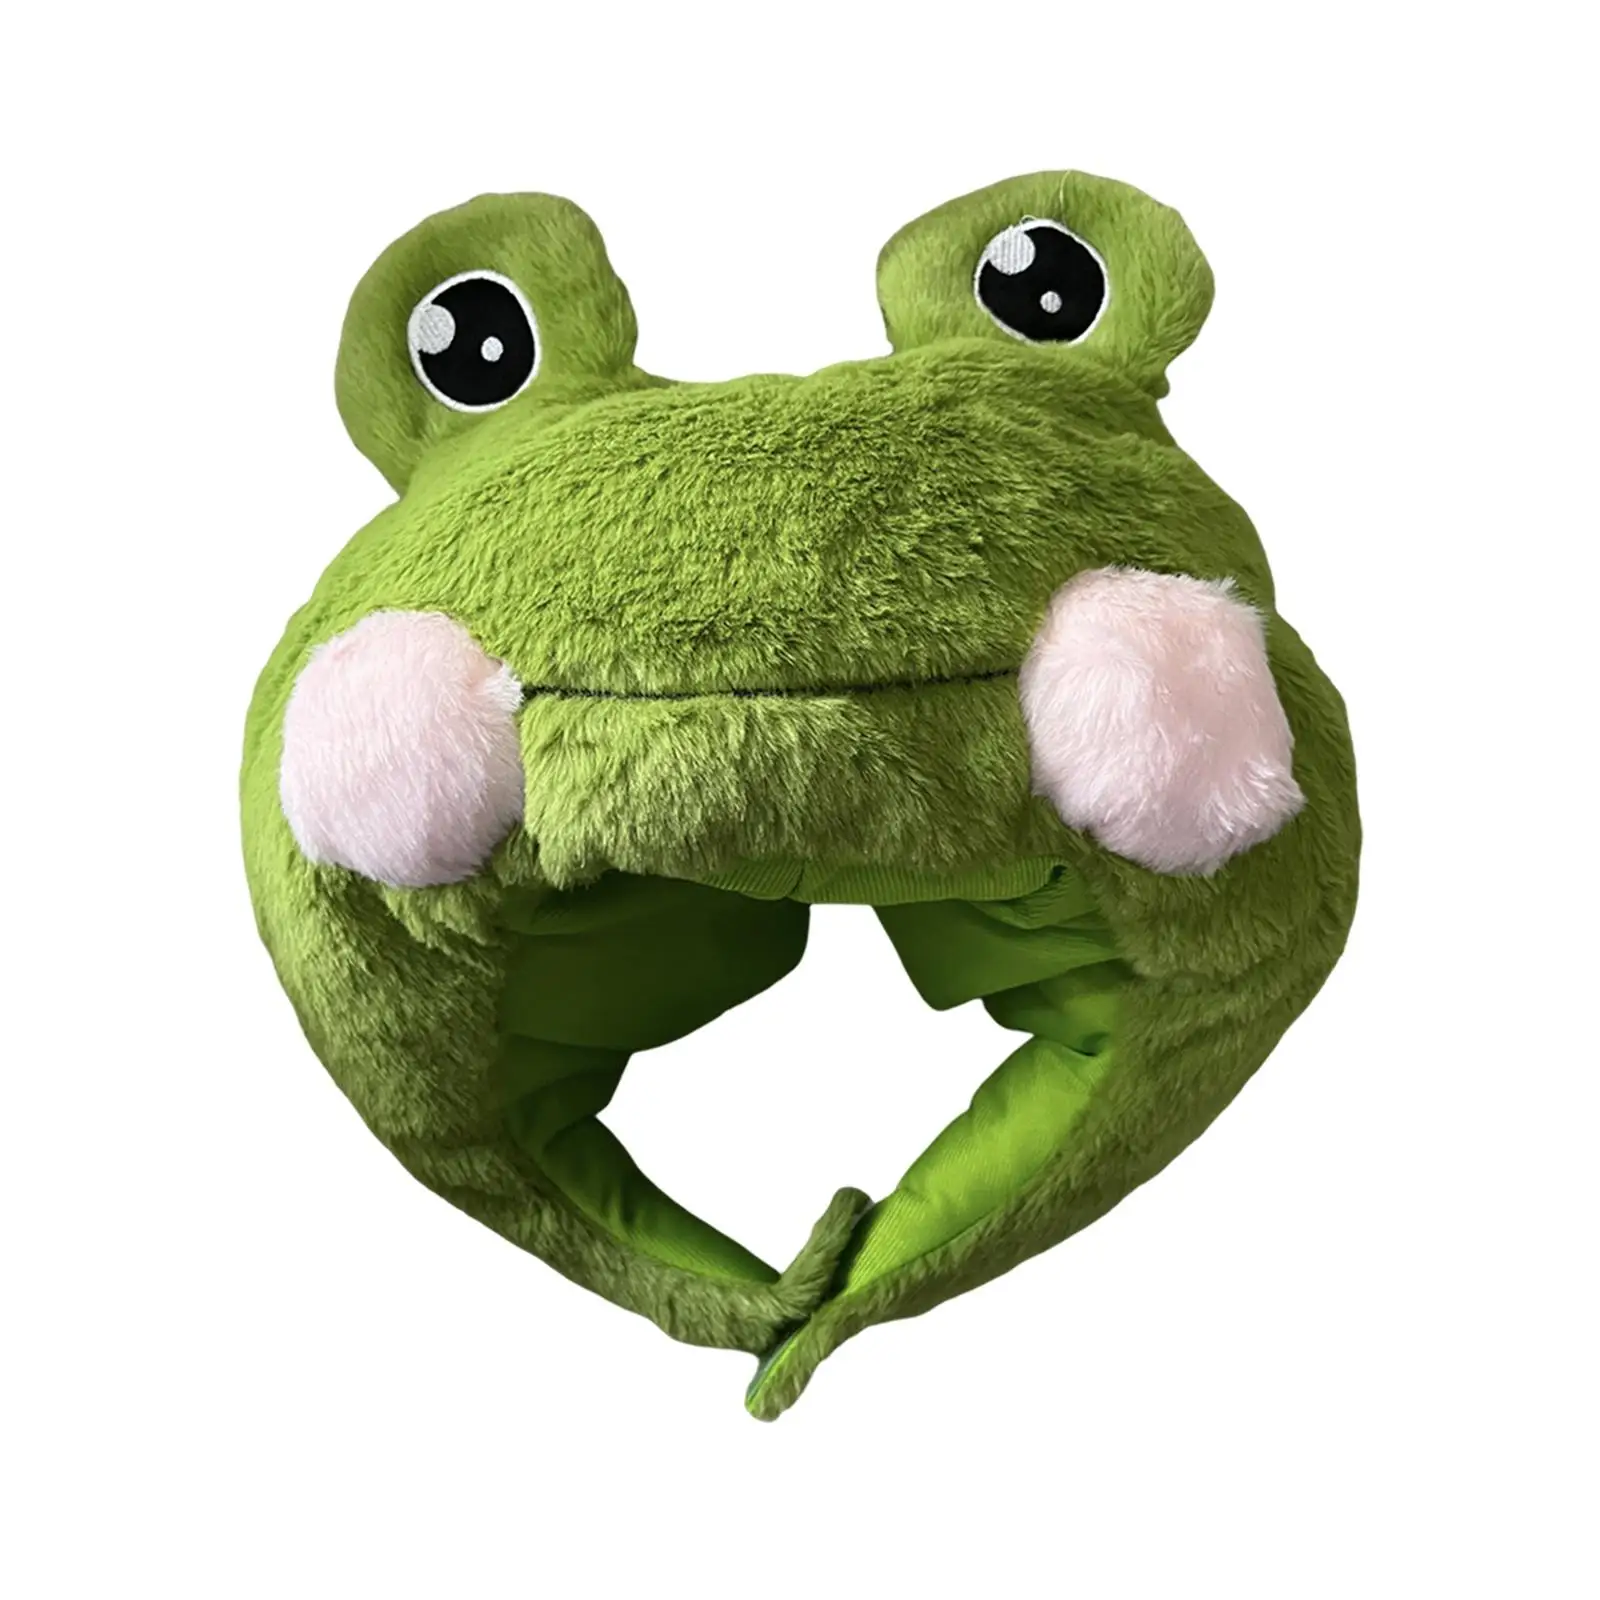 Lovely Frog Shaped Hat Costume Accessory Hats Headgear Stuffed Toy Cosplay Headwear Photo Prop for Adults Kids